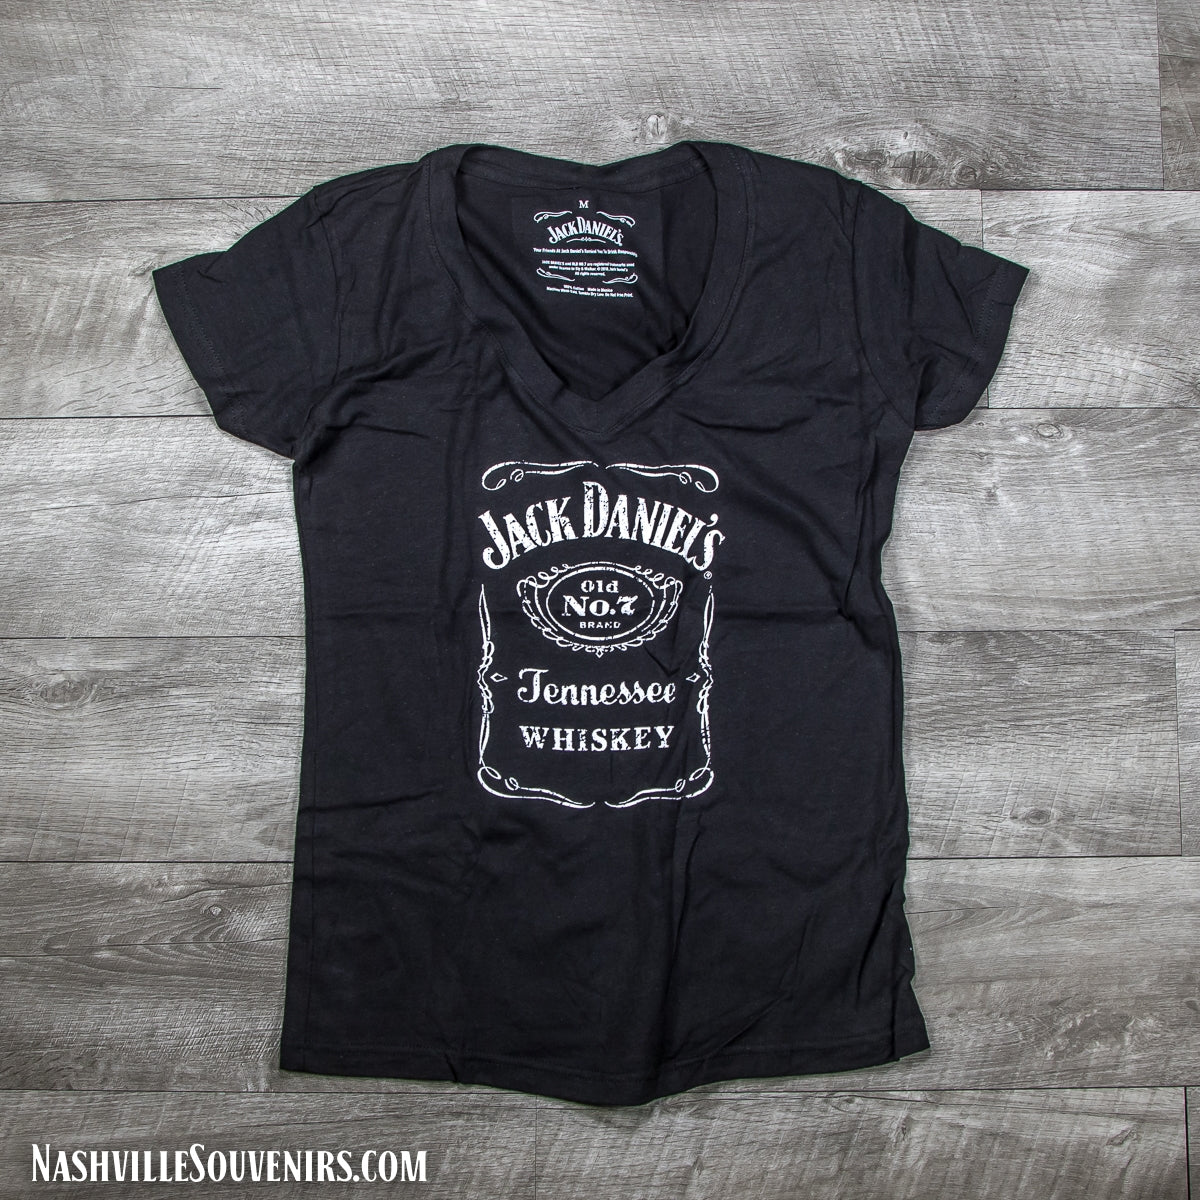 Officially licensed ladies Jack Daniels Bottle Label V-neck T-Shirt in black with white logo. Get yours today with FREE SHIPPING on all US orders over $75!